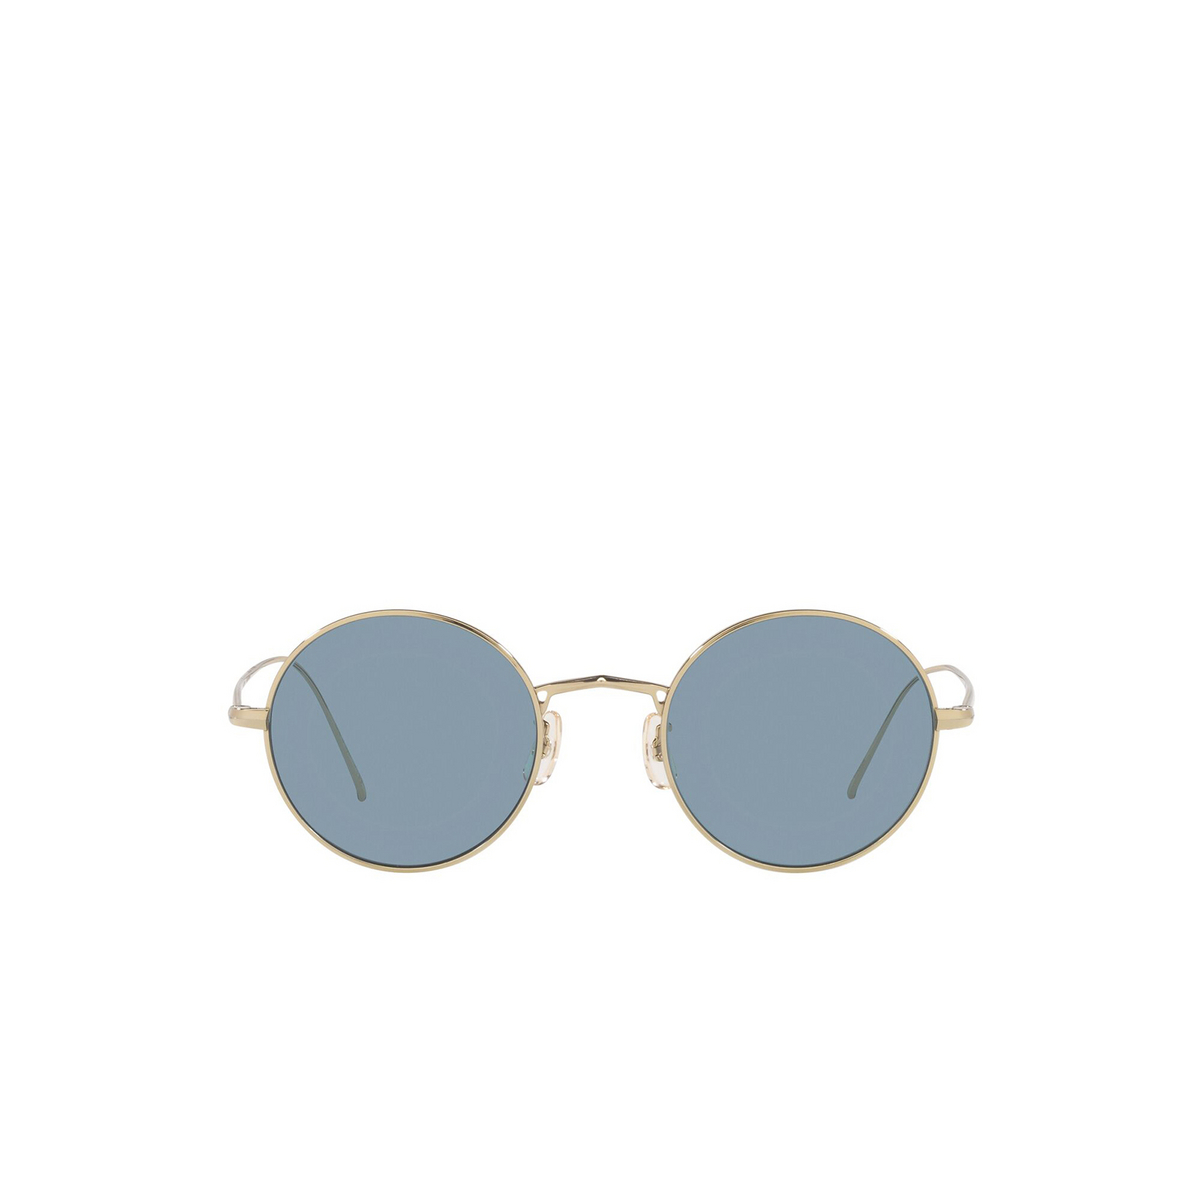 Oliver Peoples® Round Sunglasses: G. Ponti-3 OV1293ST color Soft Gold 503556 - front view.